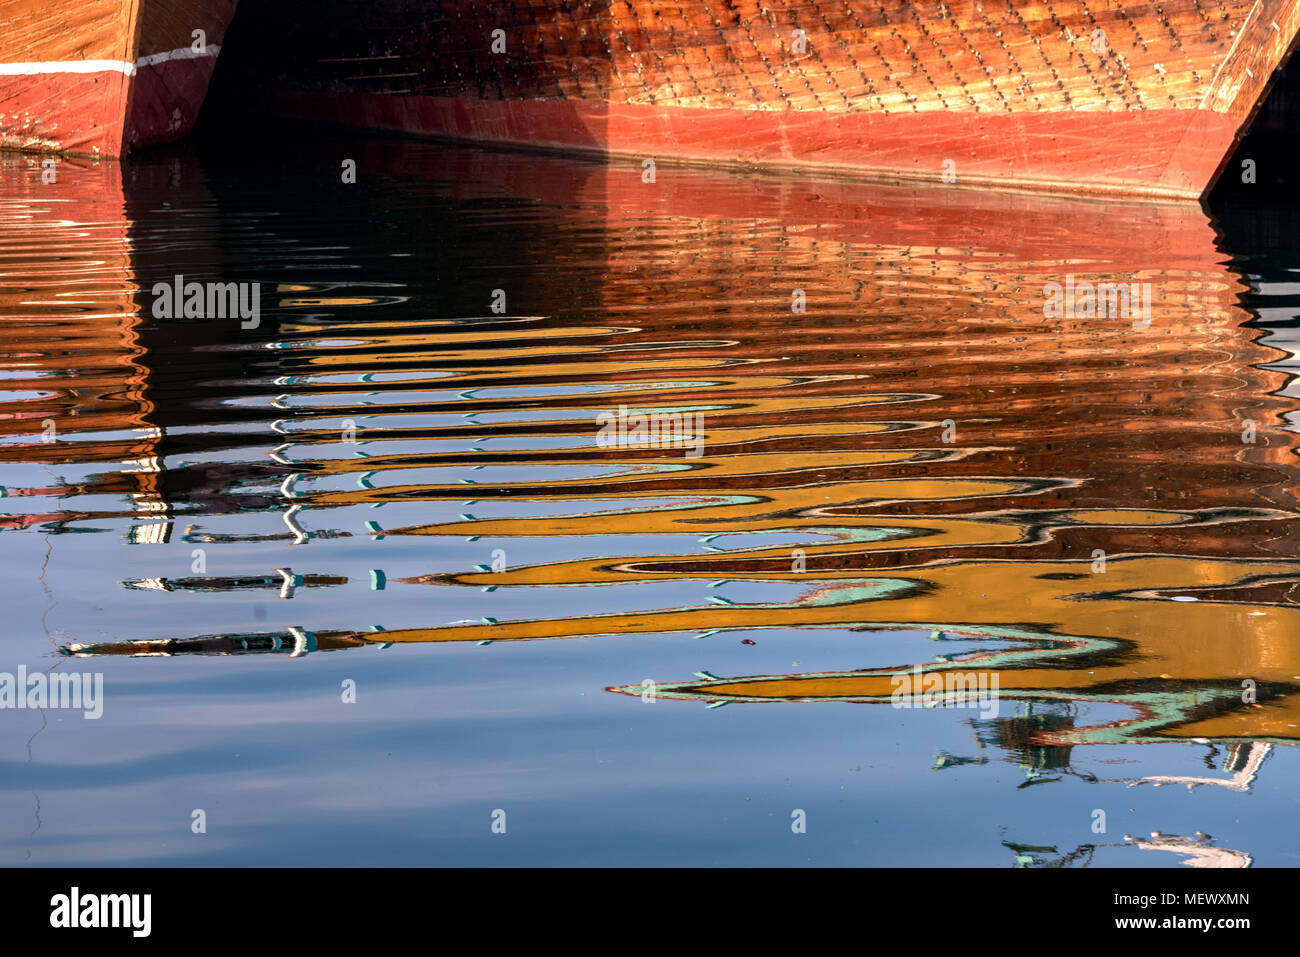 Shapes and pattern of Dubai boats reflecting in water. Stock Photo